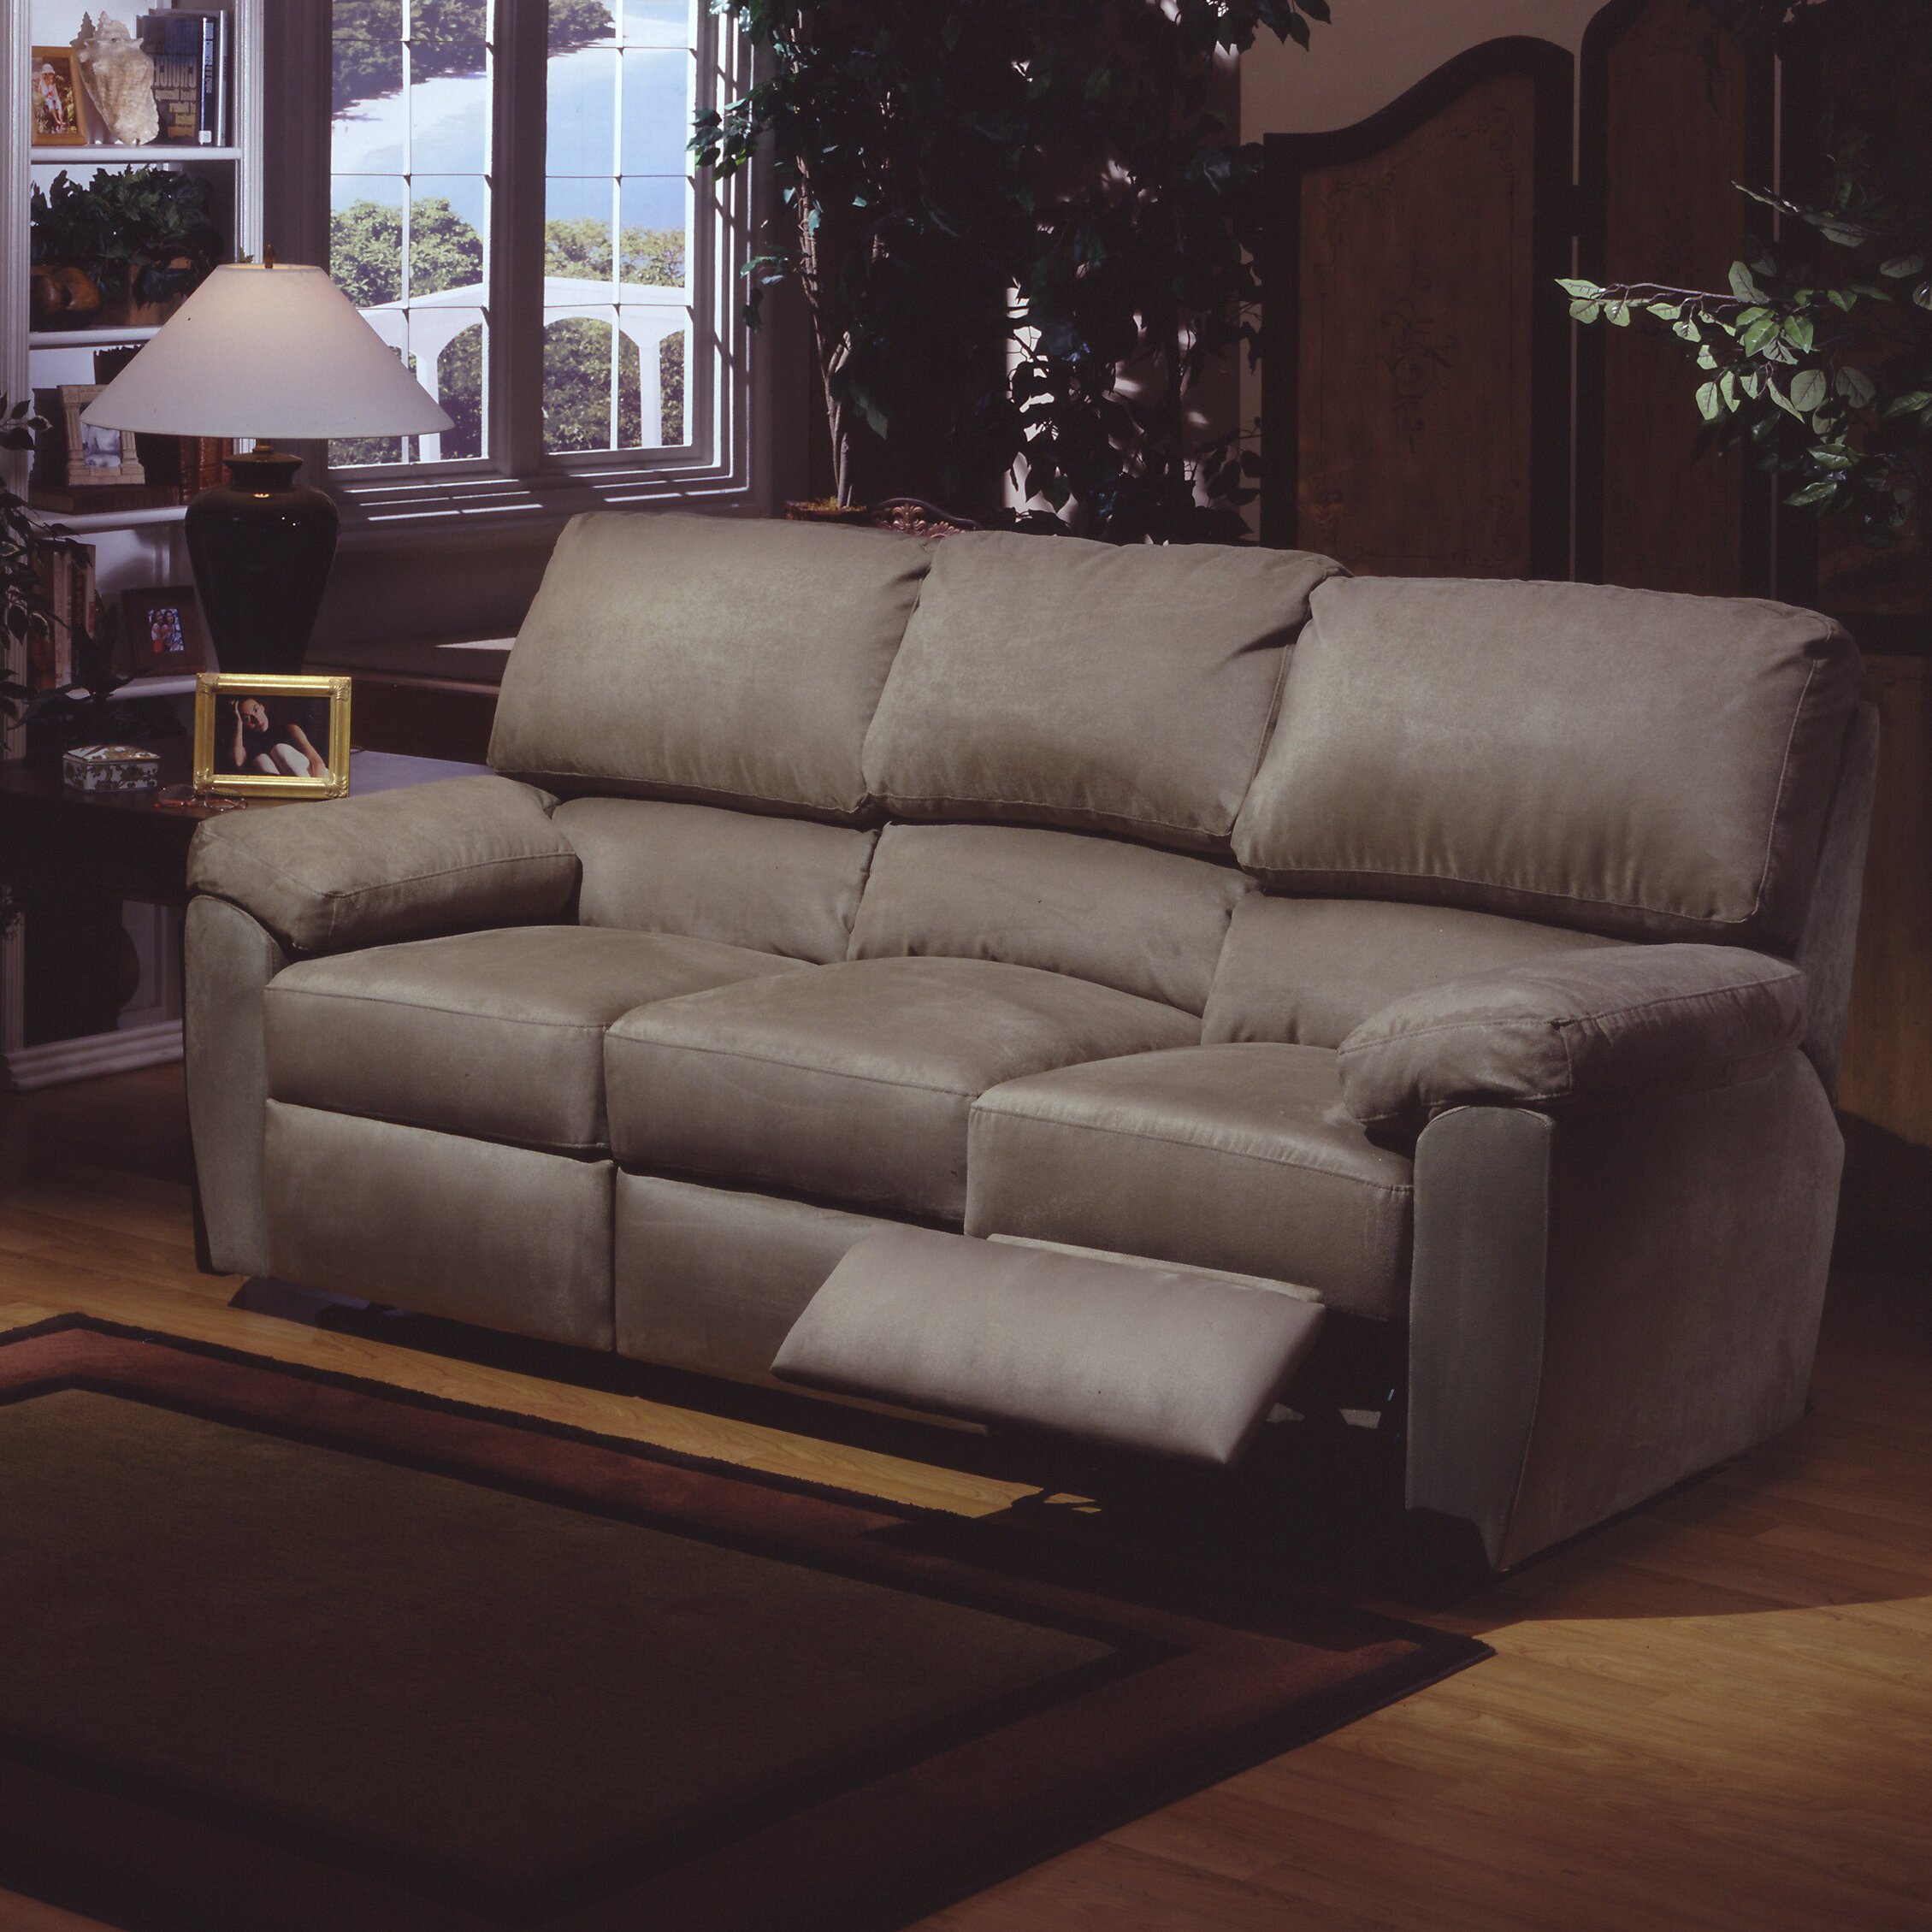 Omnia Leather Vercelli Leather Reclining Sofa & Reviews